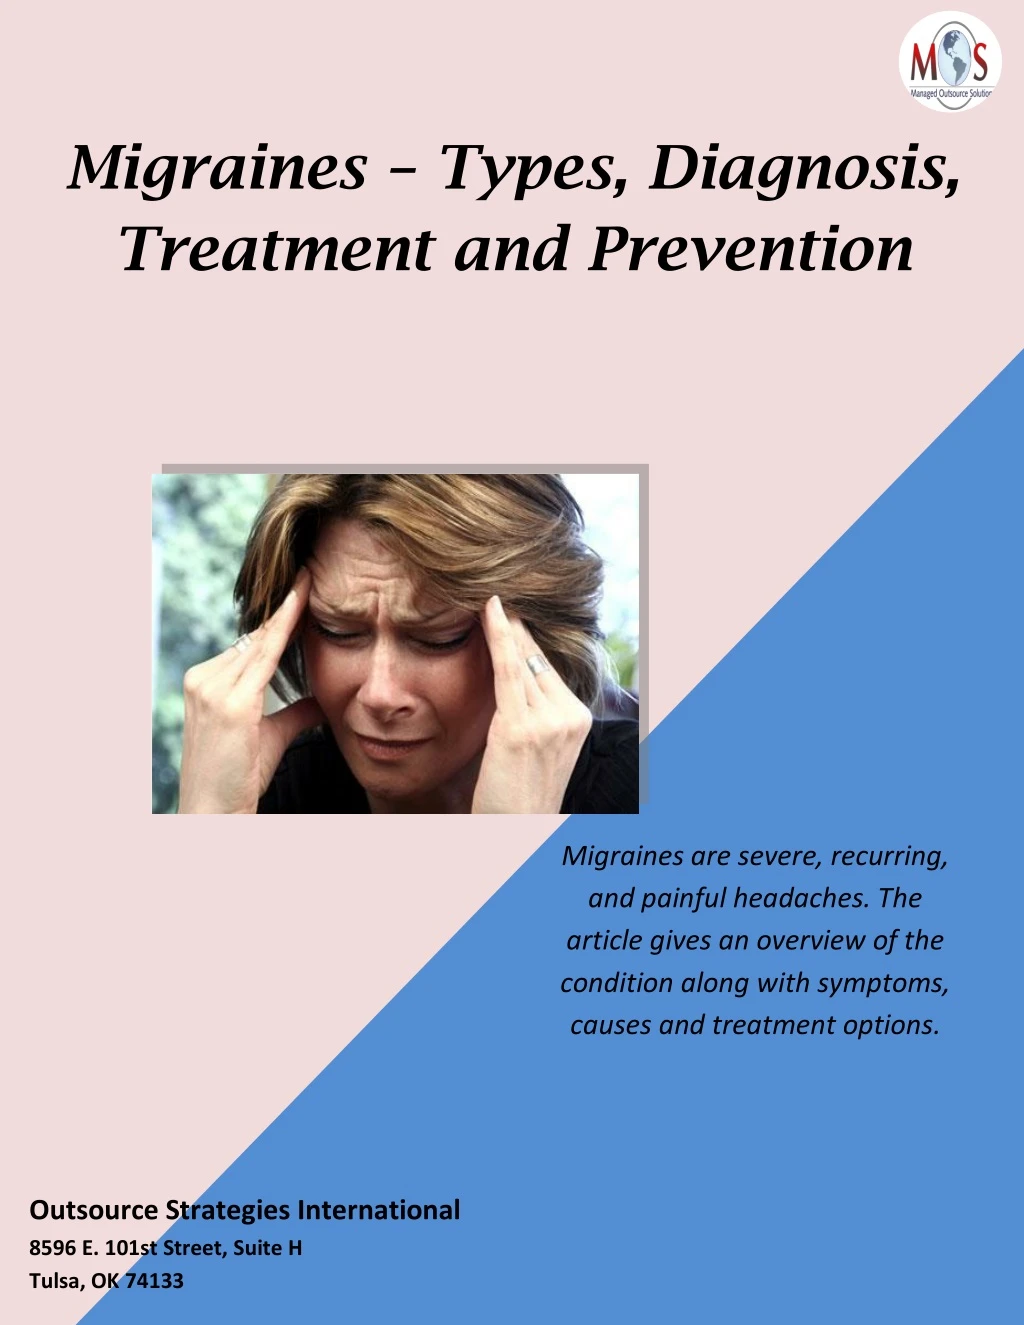 migraines types diagnosis treatment and prevention